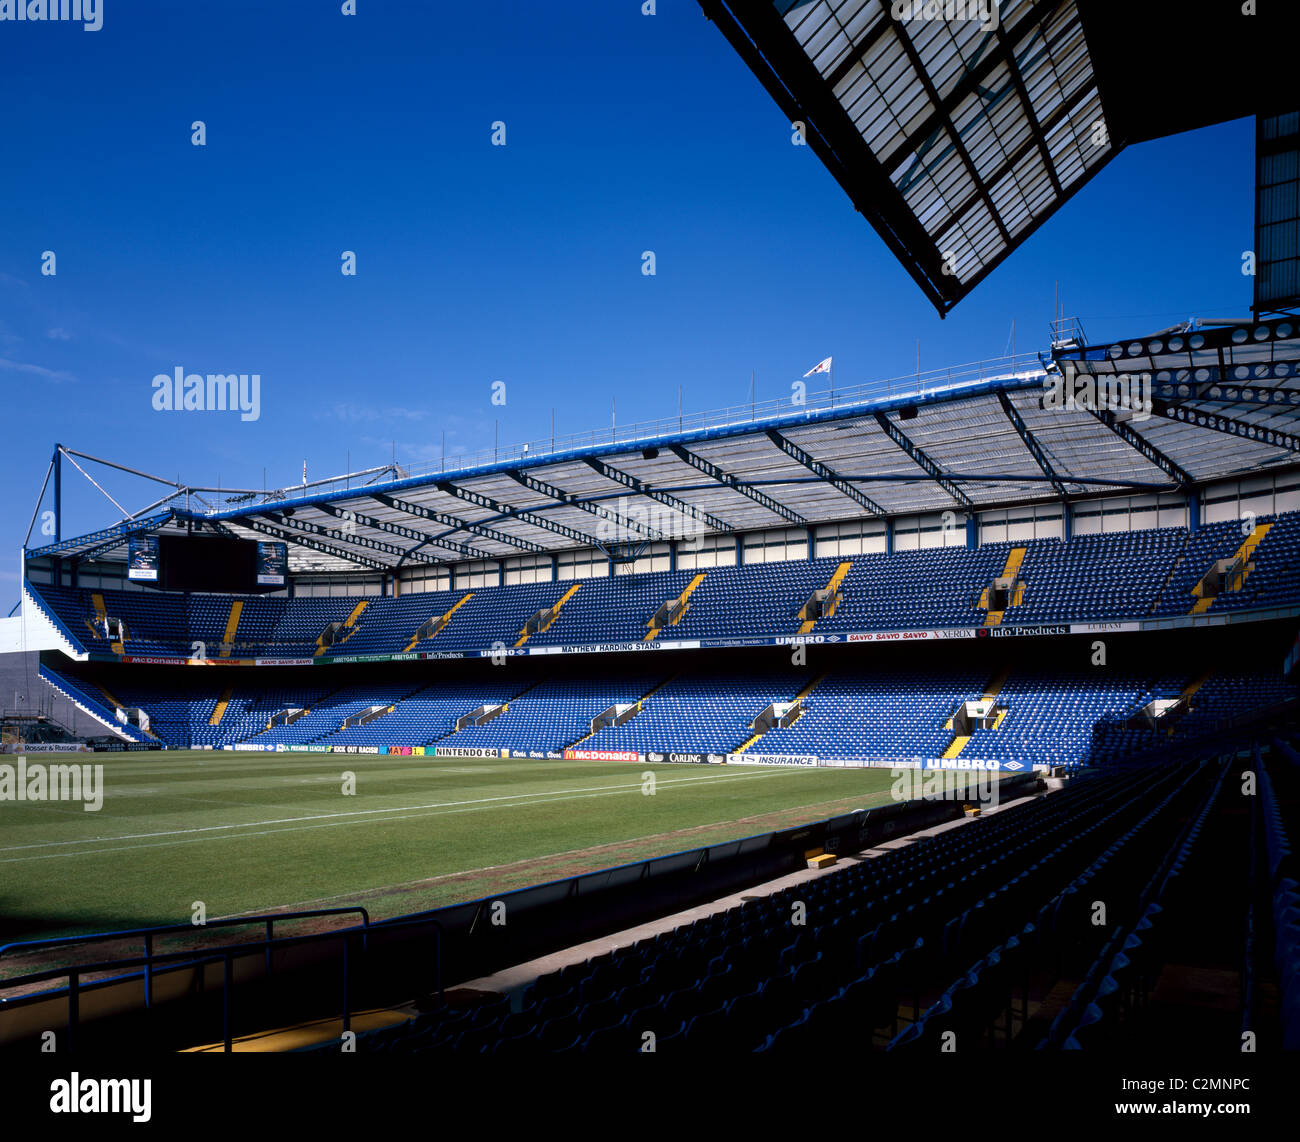 London, UK - October 16, 2011: Stand Of Stamford Bridge, Home Ground Of  Chelsea F.C. Stock Photo, Picture and Royalty Free Image. Image 63164873.